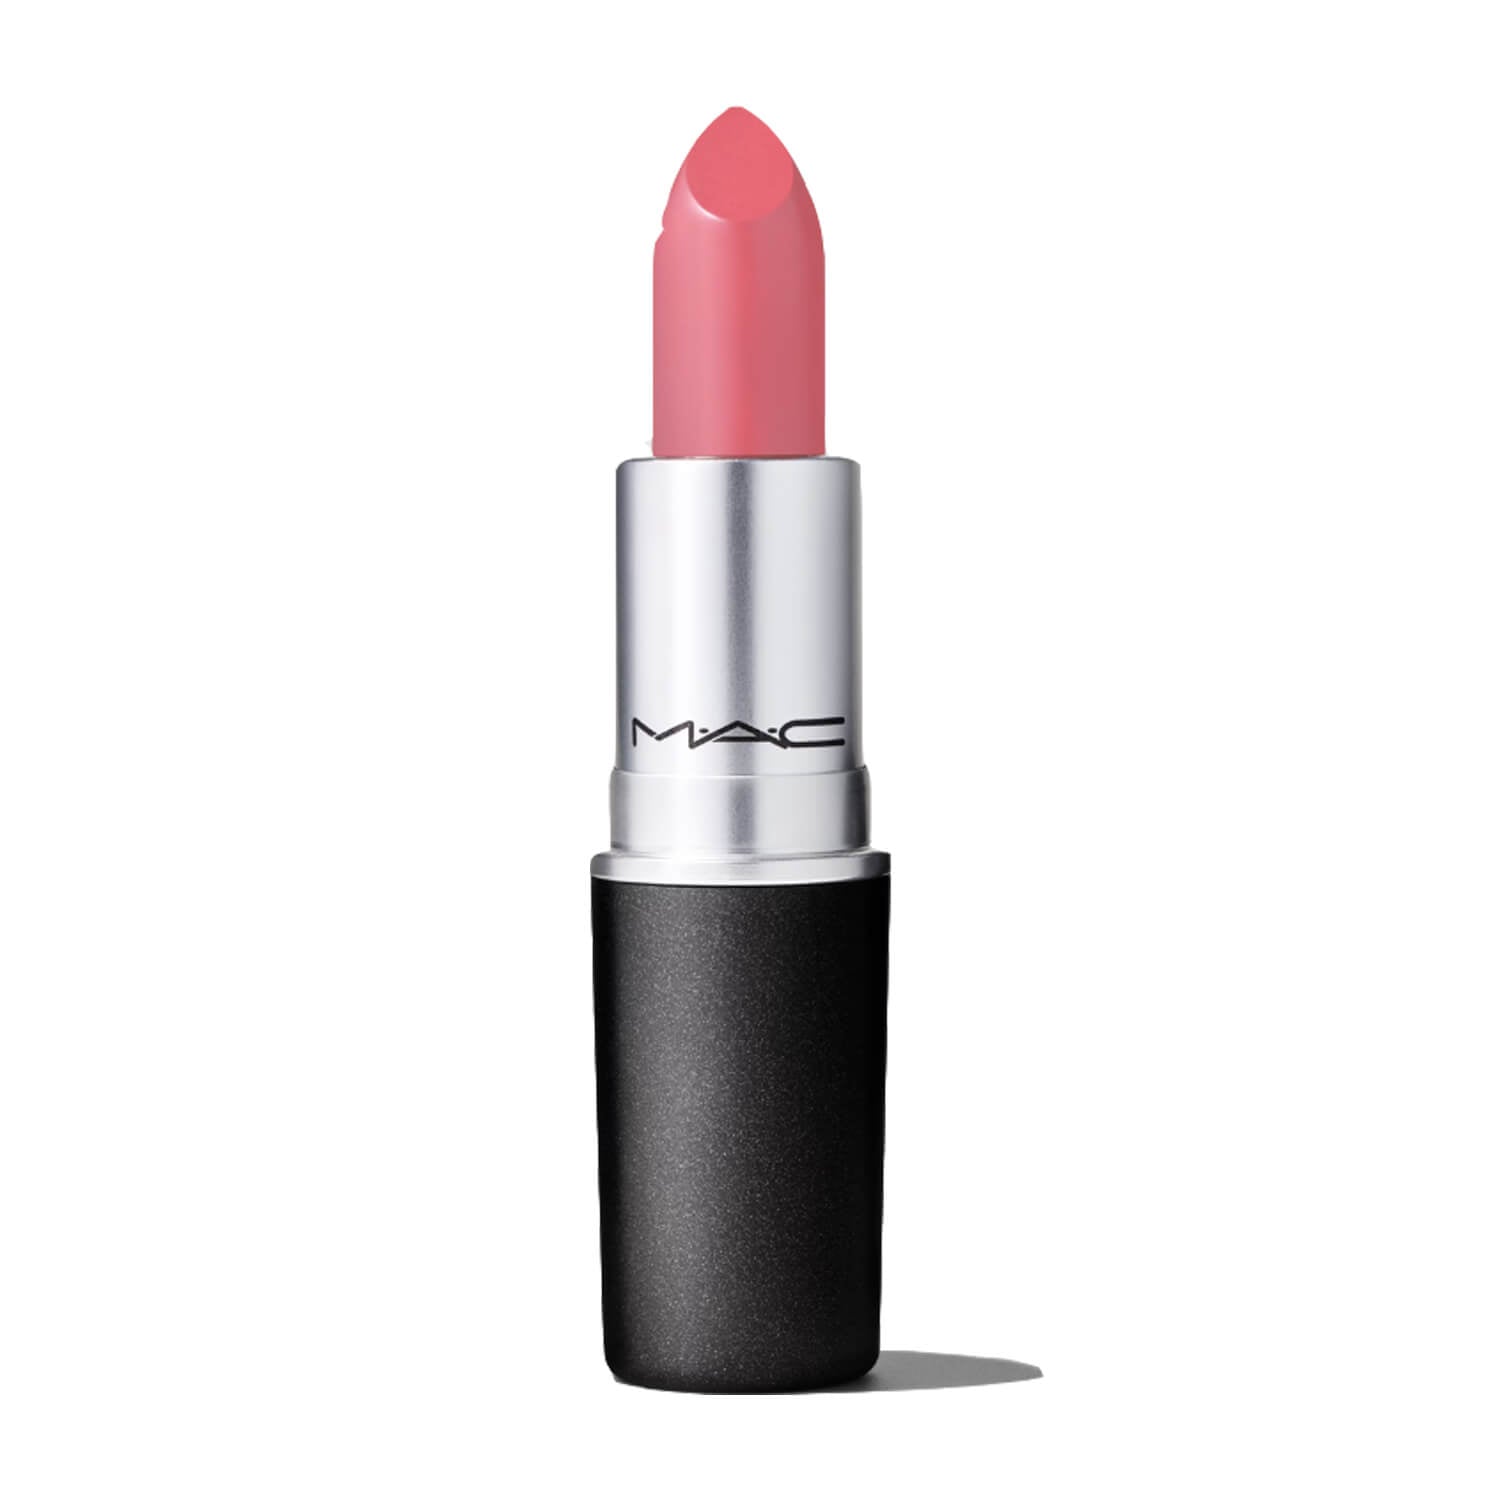 Shop 100% original MAC Lipstick in shade Please me is available at Heygirl.pk for delivery in Pakistan